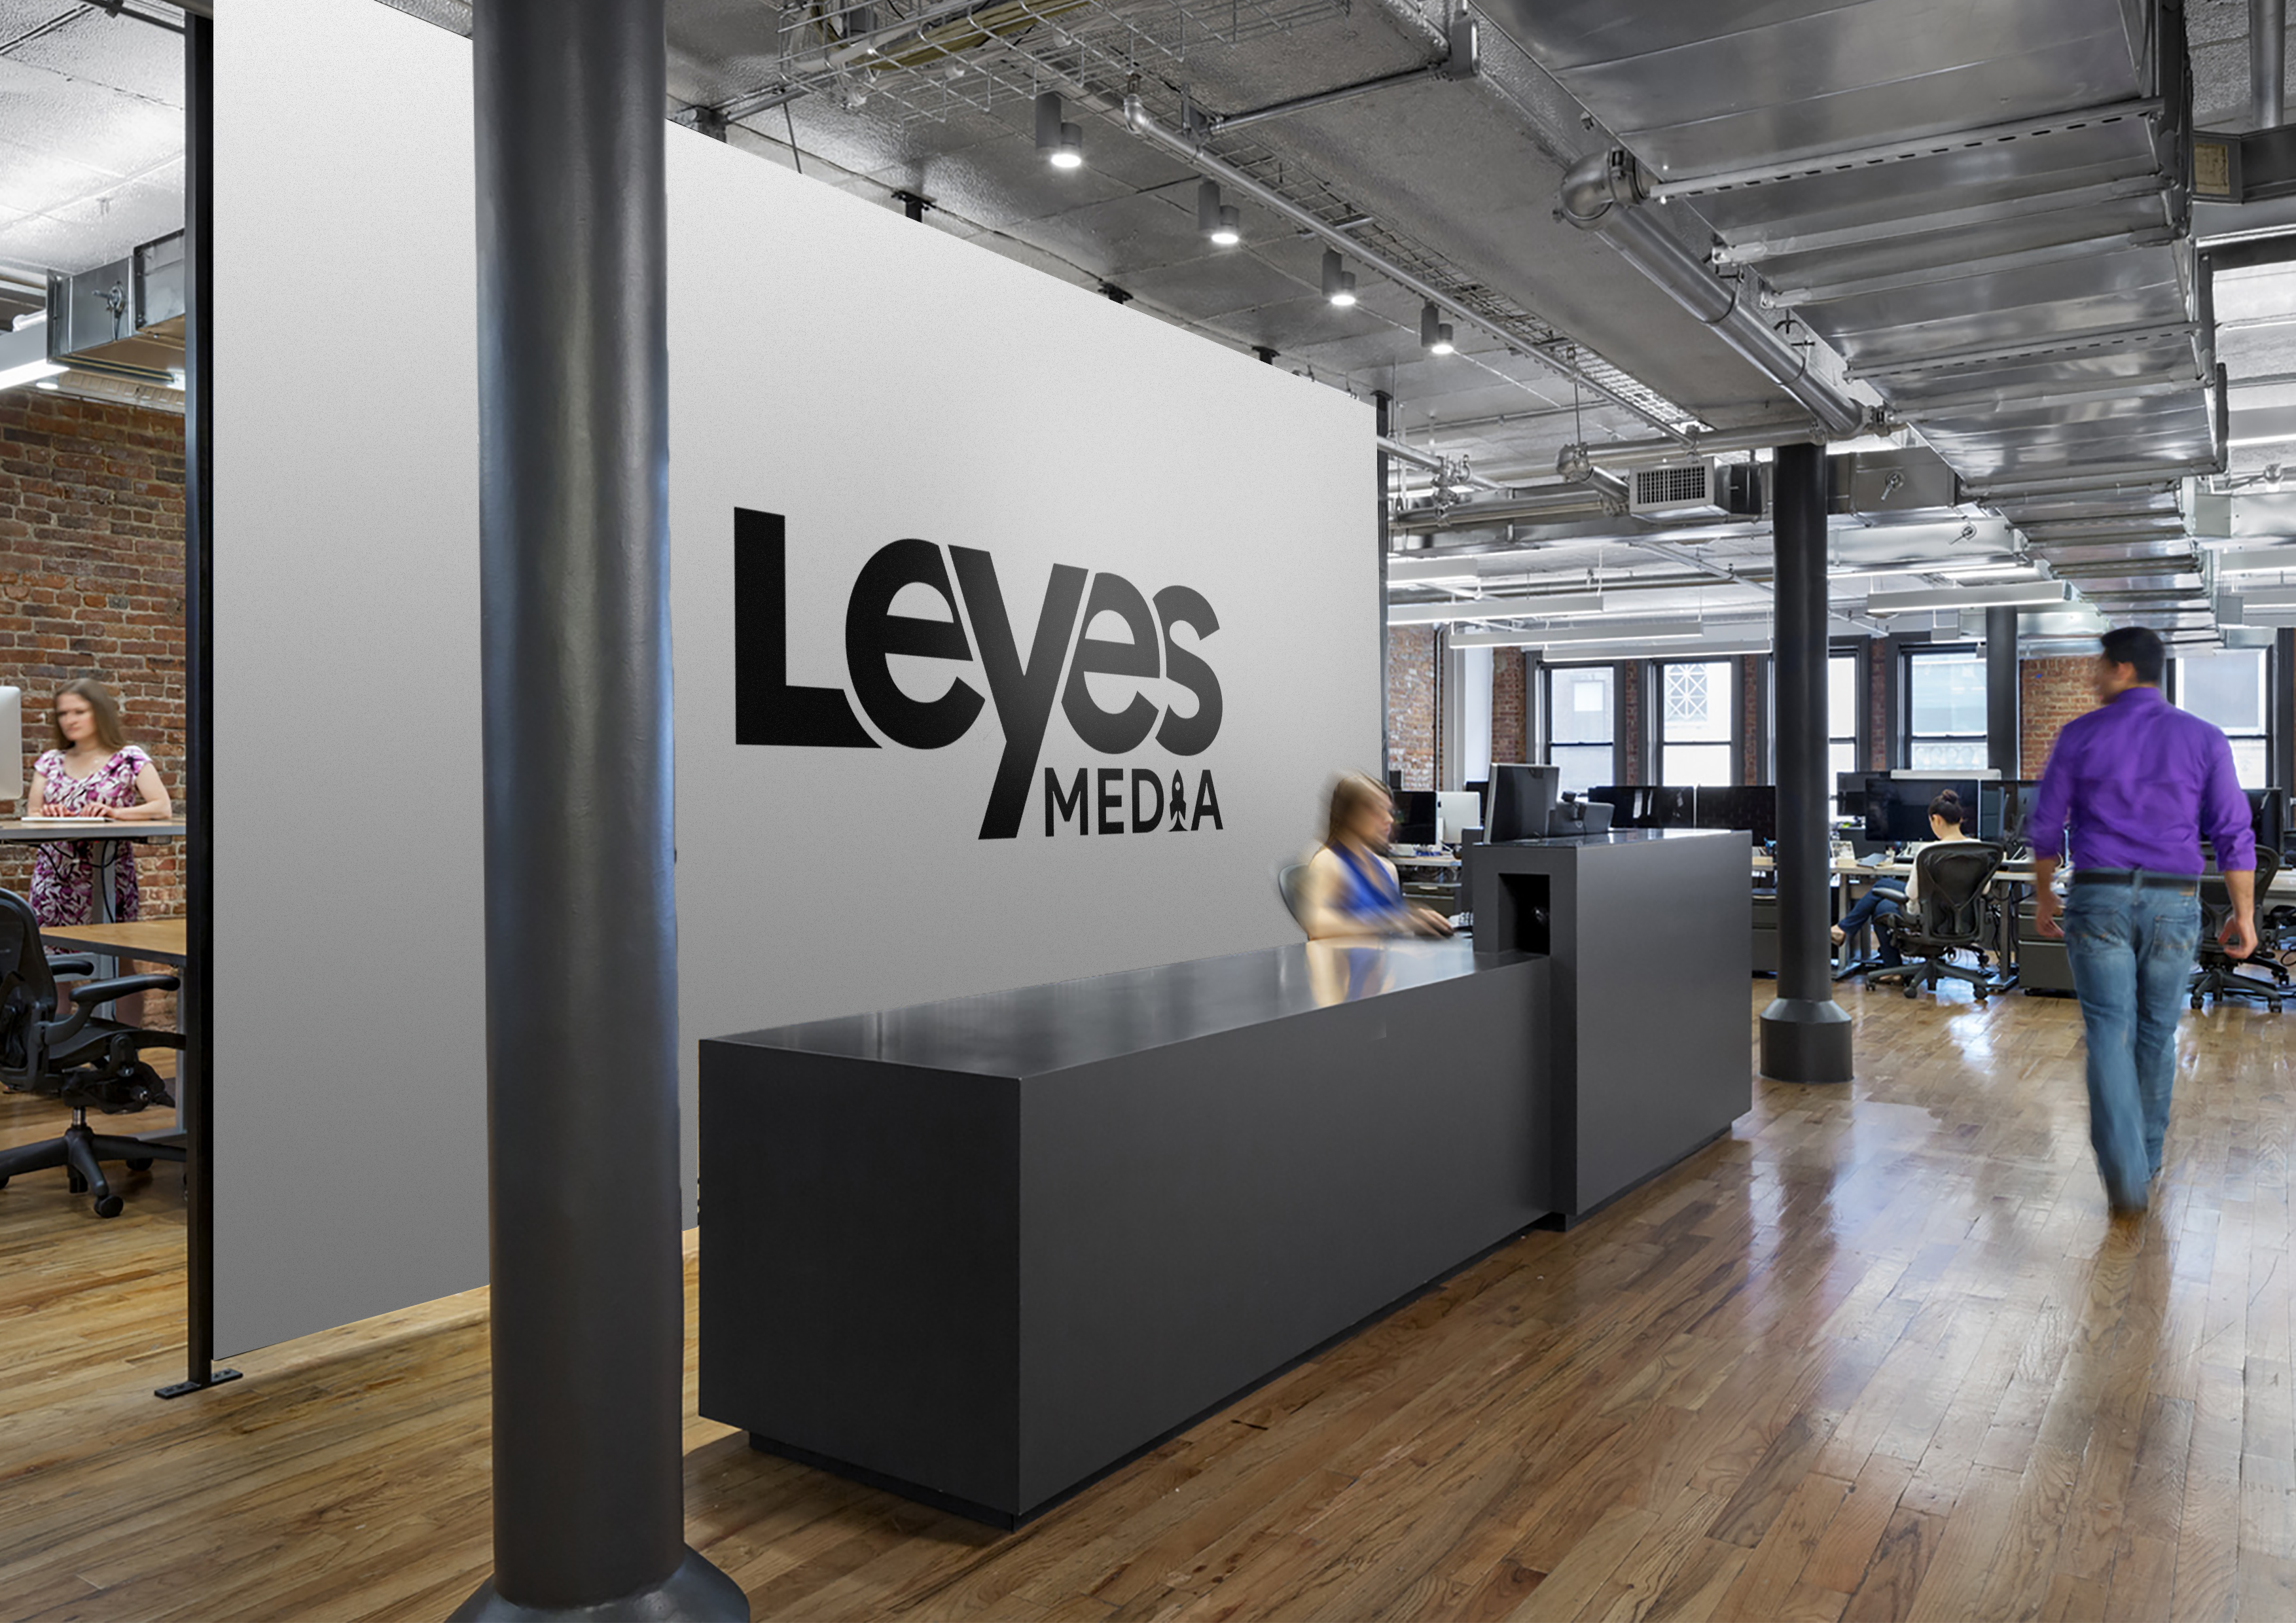 Leyes Enterprises, Friday, May 15, 2020, Press release picture